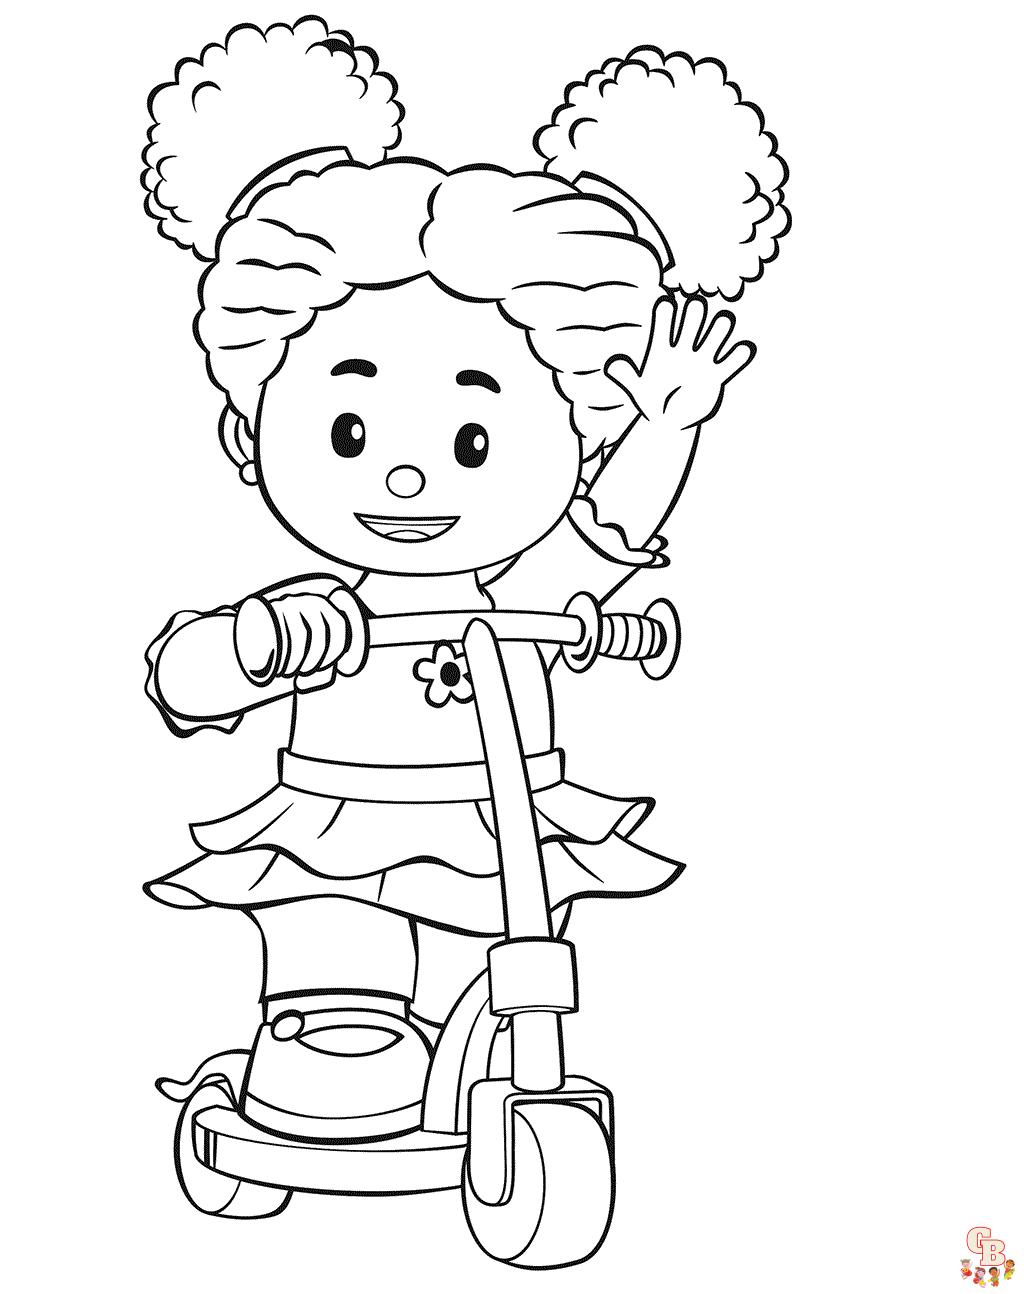 Explore fun and creative scooter coloring pages for kids